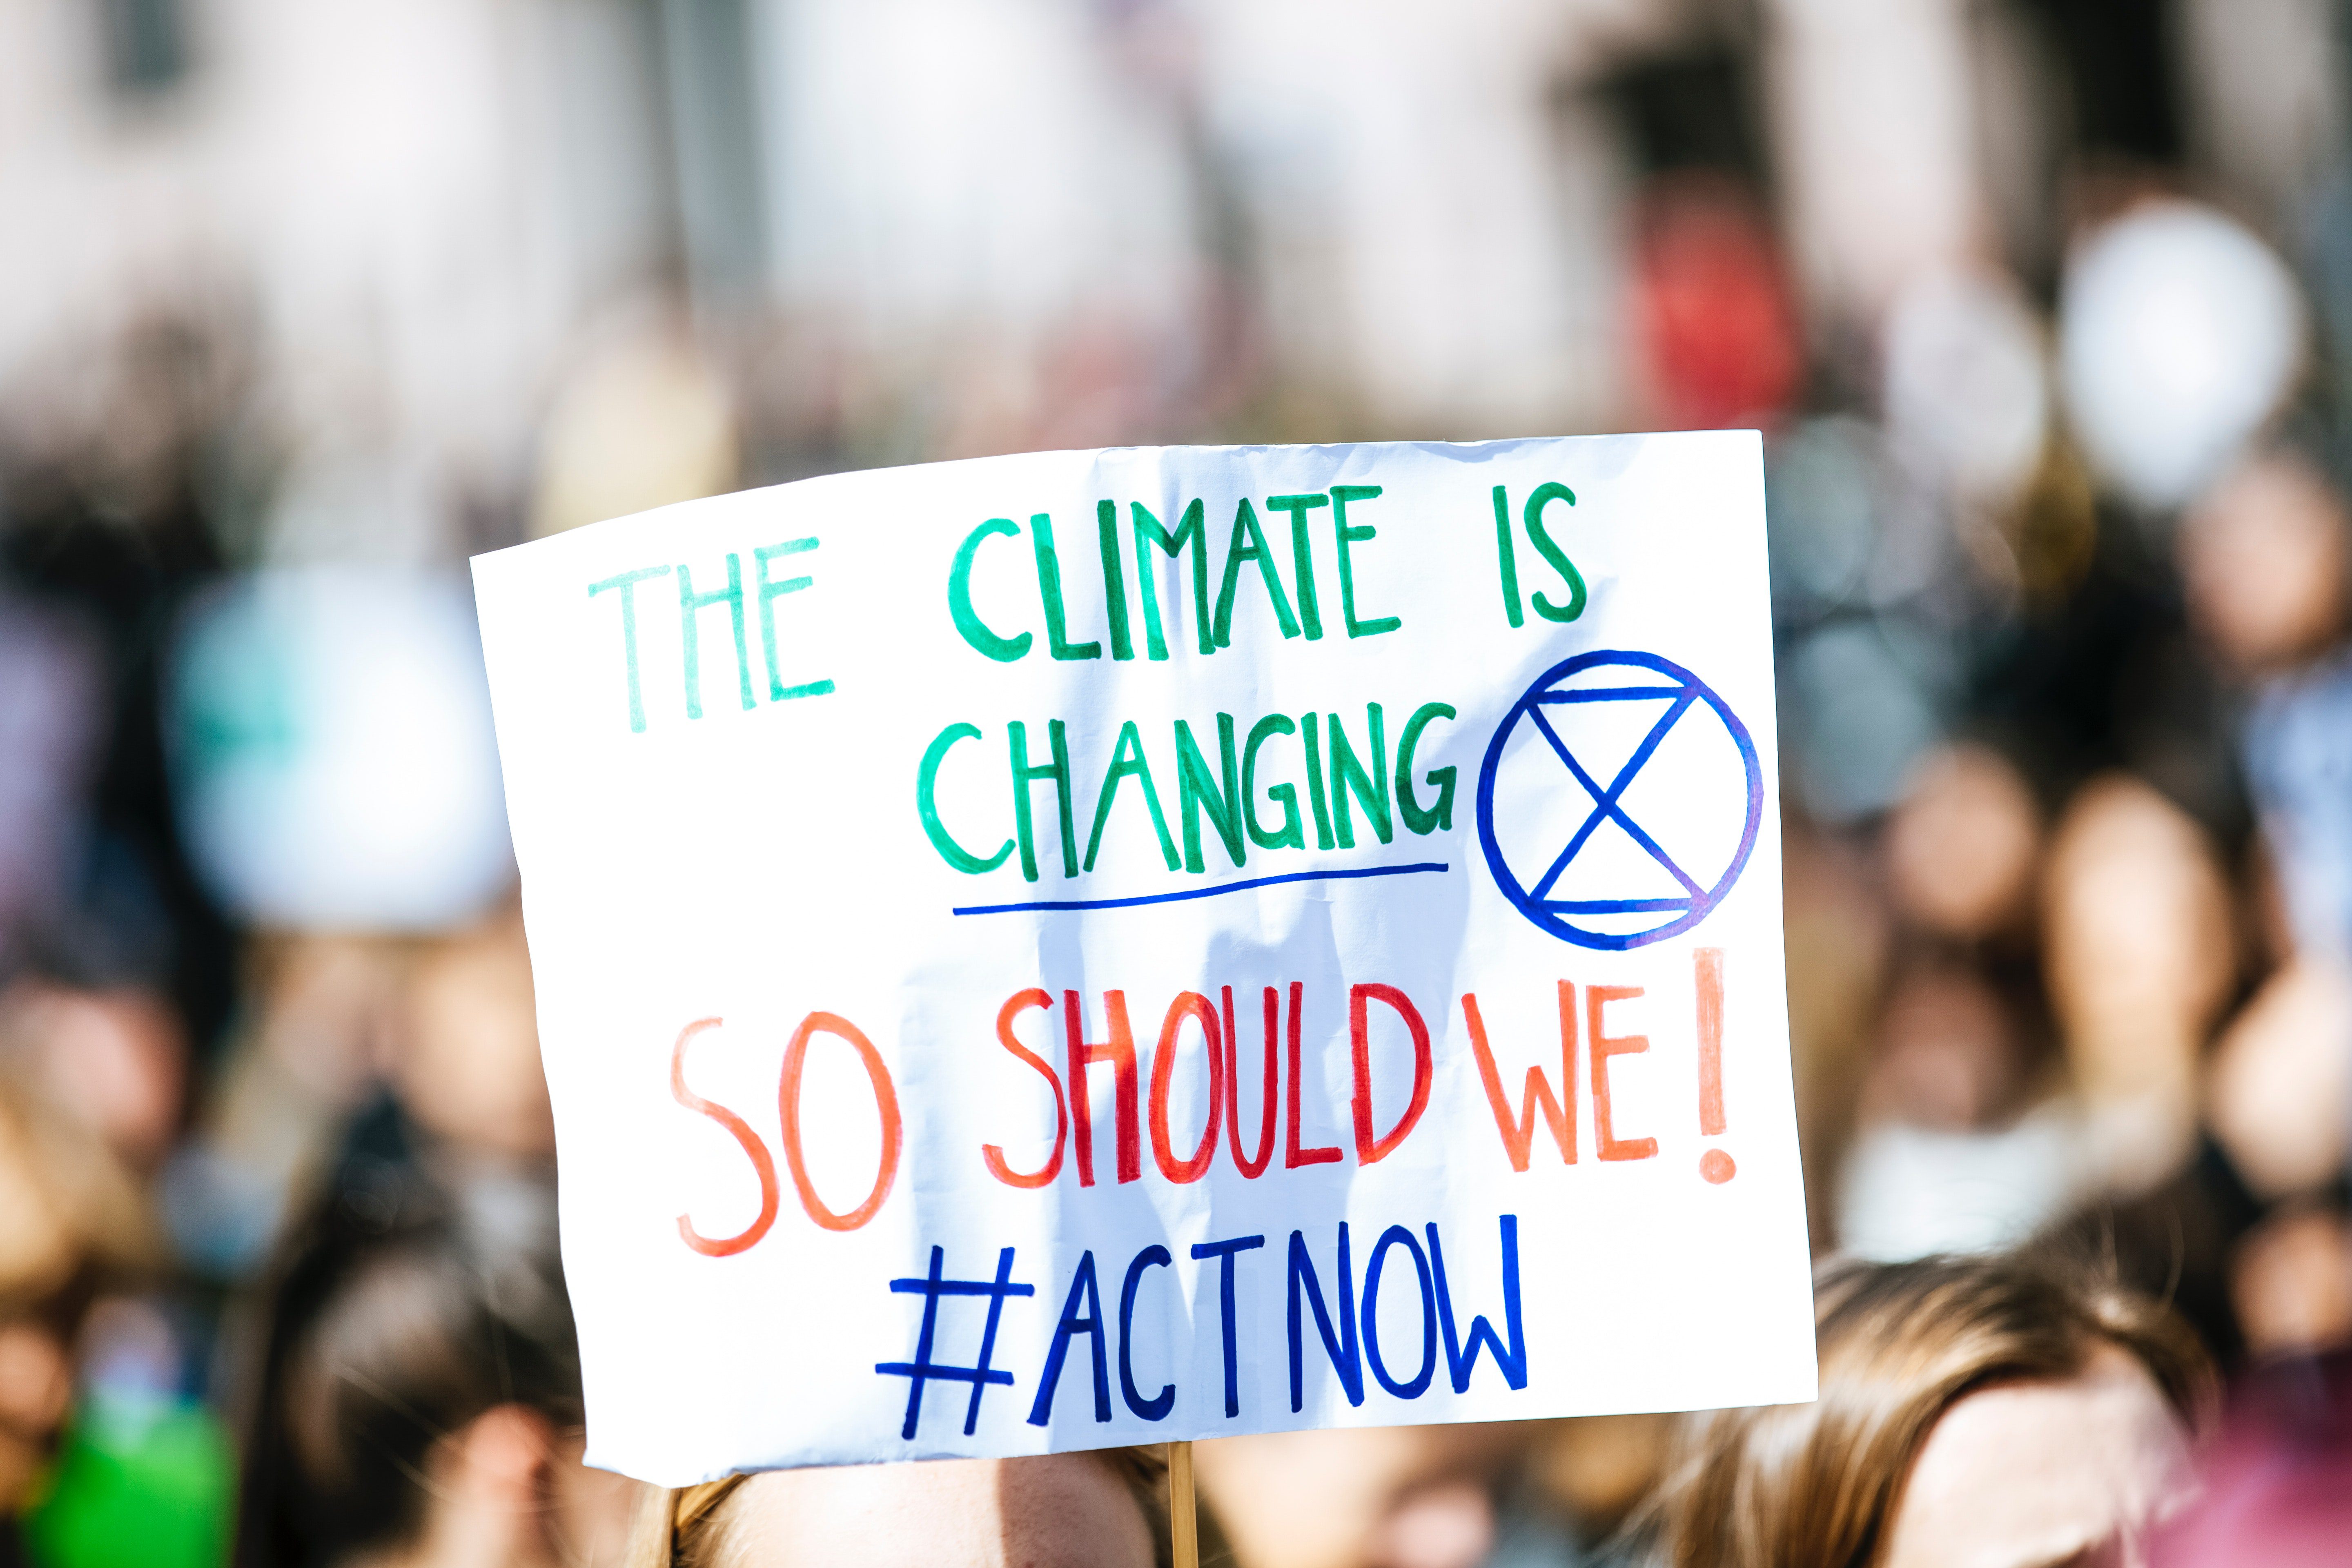 A Global Warming and Climate Change demostration banner